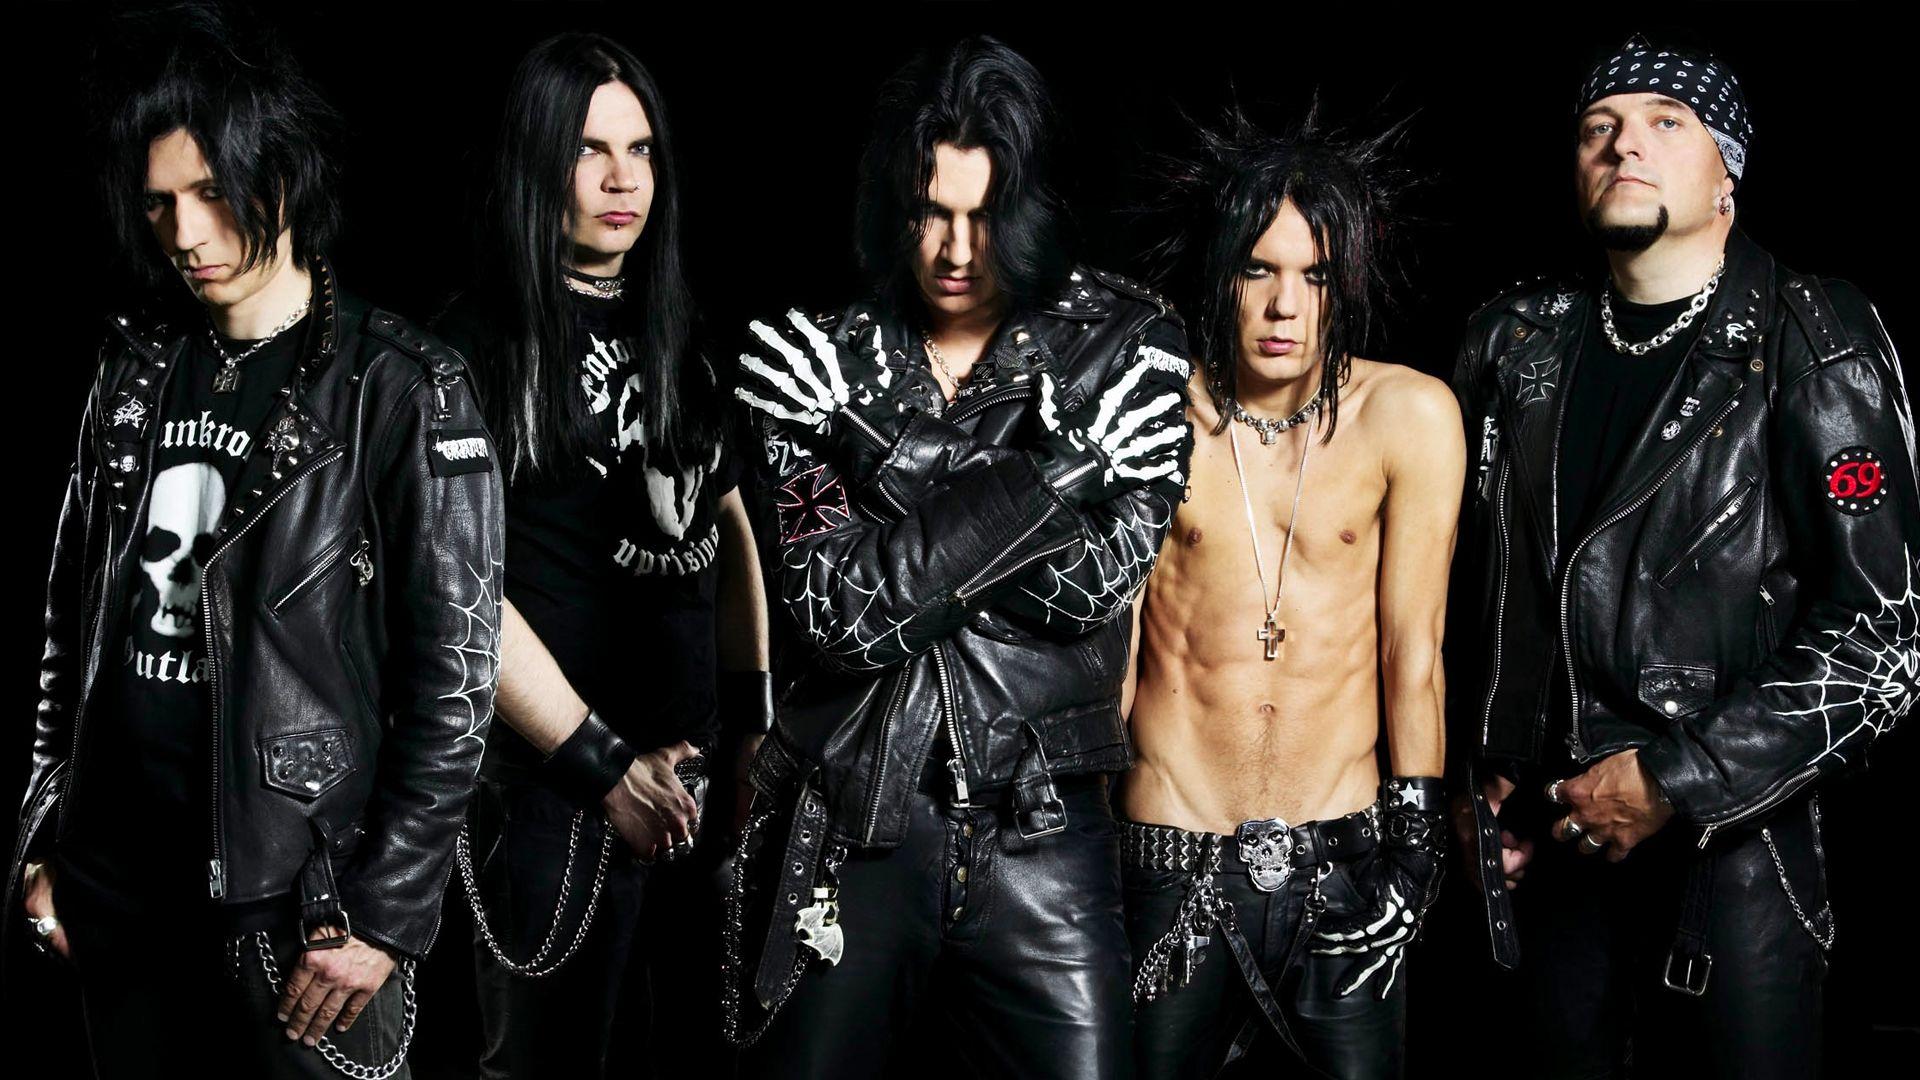 Download Wallpaper 1920x1080 the 69 eyes, rockers, chains, look